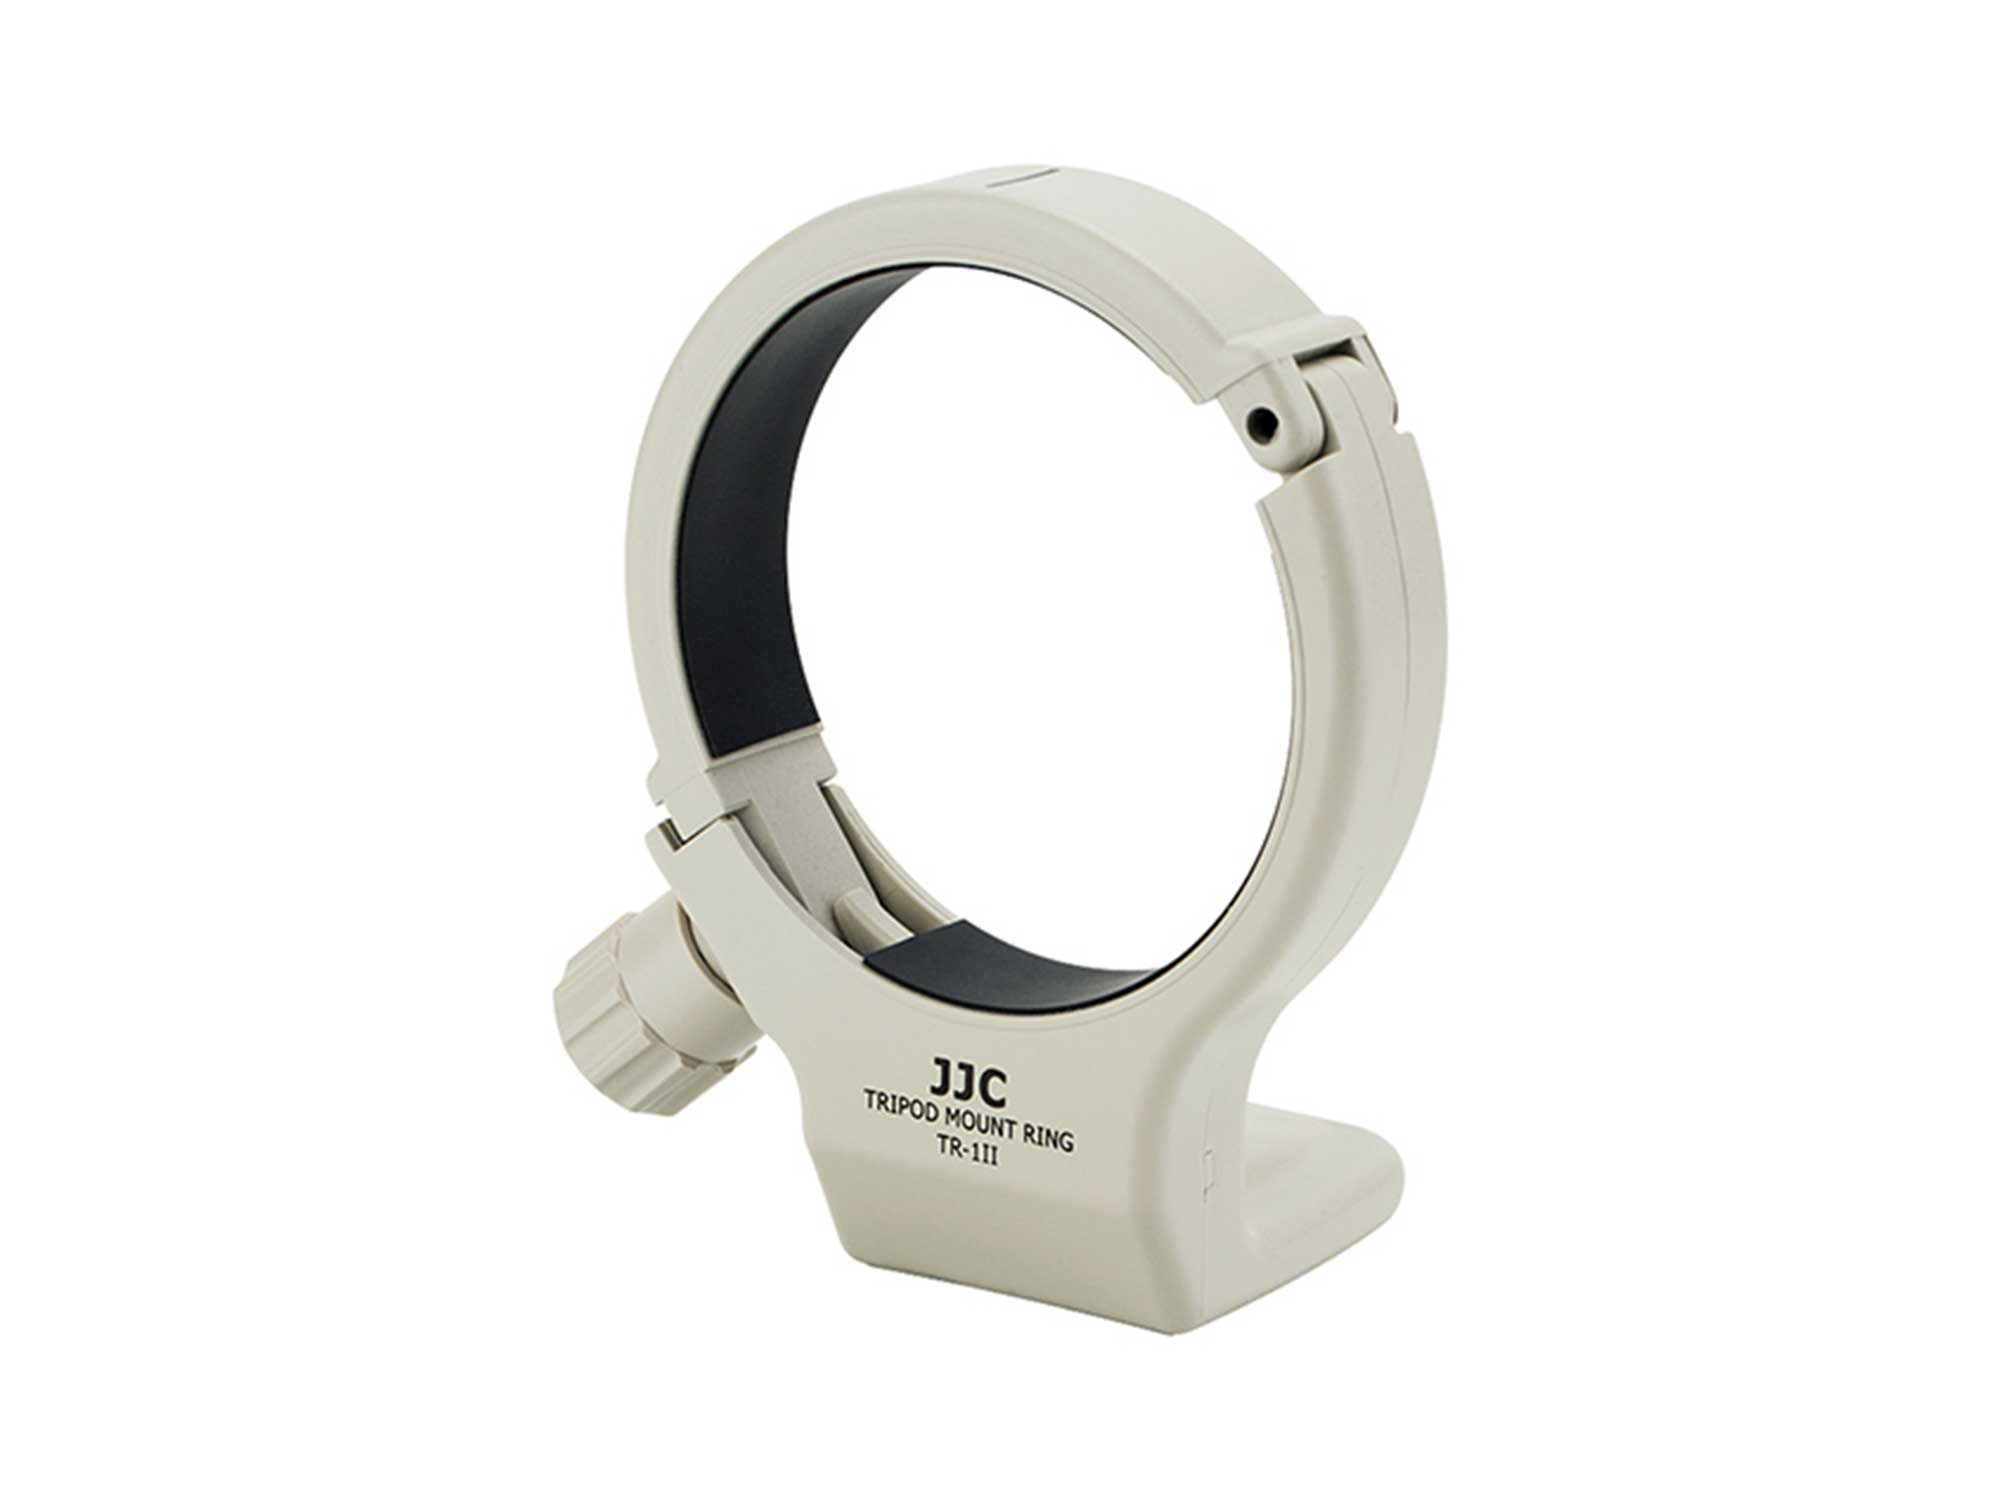 JJC Tripod Mount Ring Replaces Canon A-2 and AII (WII) (TR-1II)